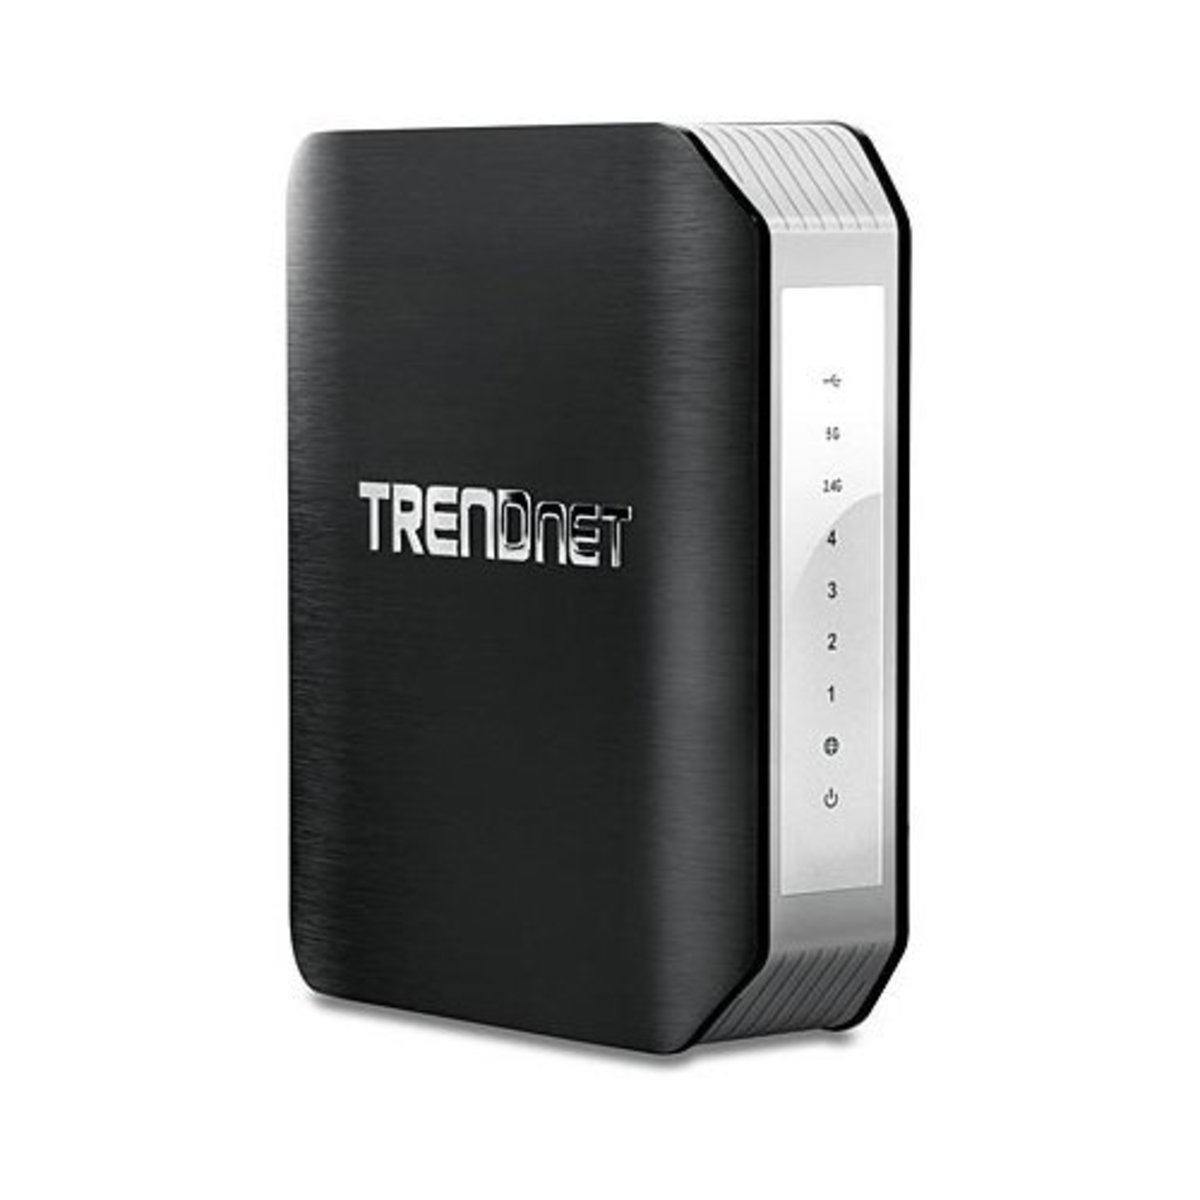 TRENDnet Wireless AC1900 Dual Band Gigabit Router with USB Share Port, TEW-818DRU